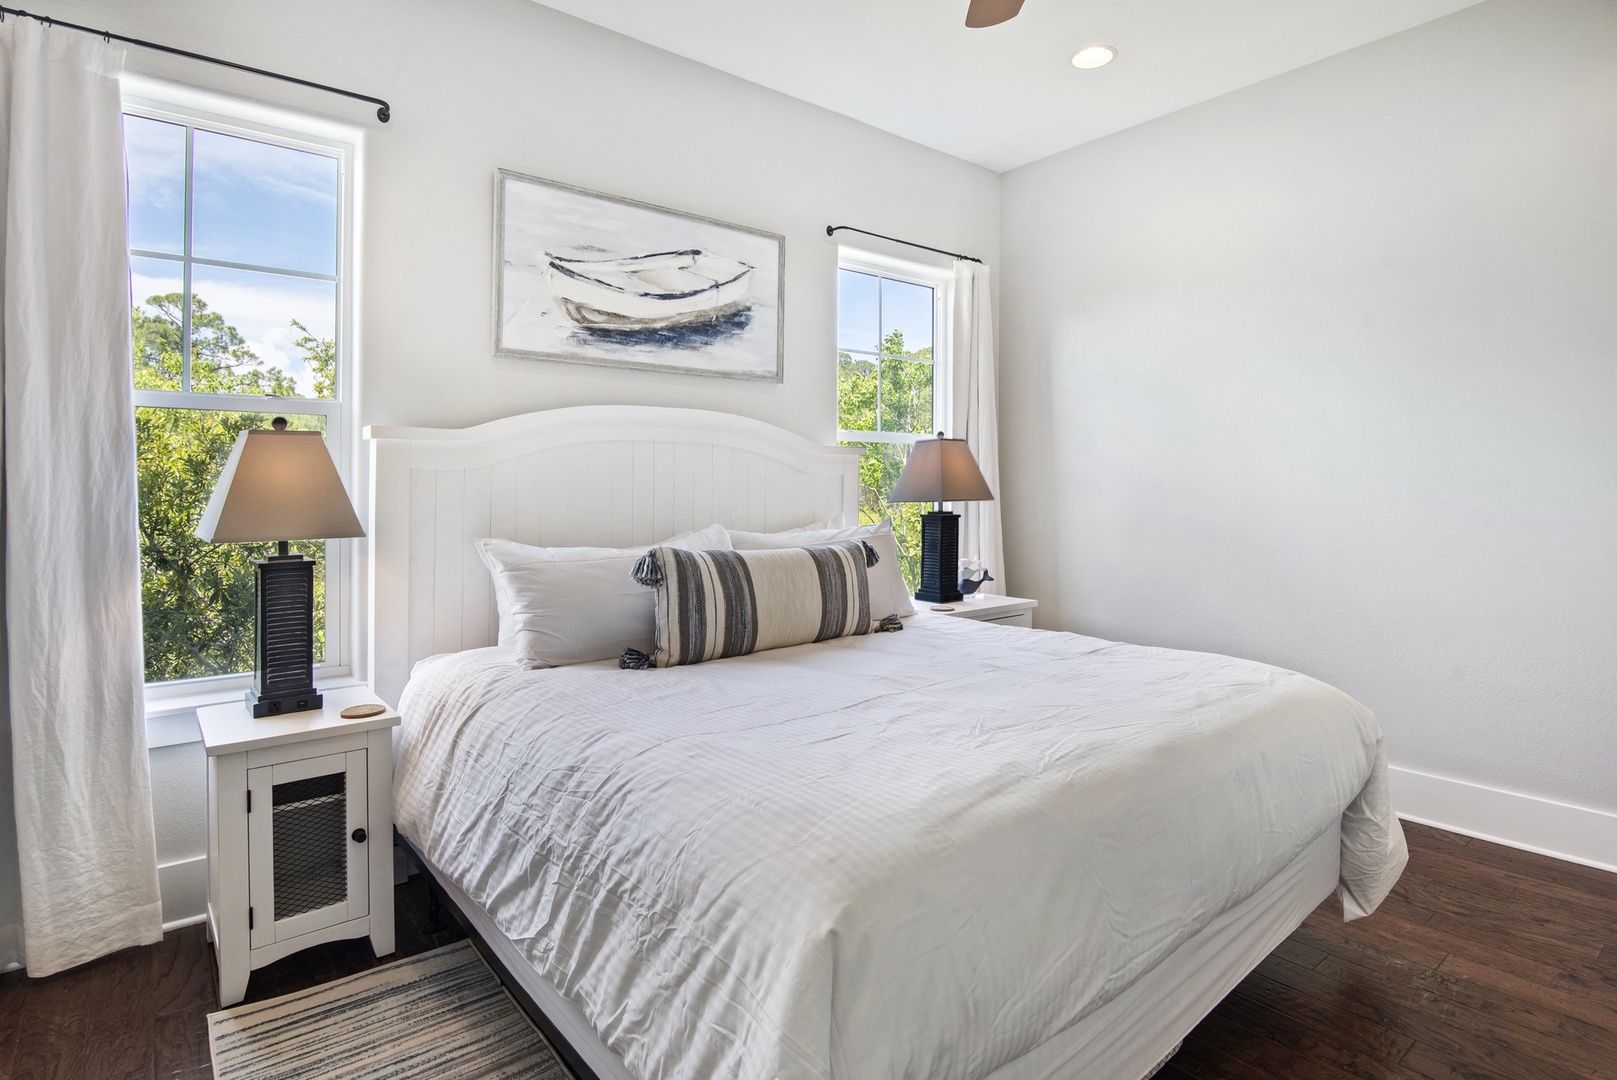 The master bedroom features a king-size bed and private bathroom!